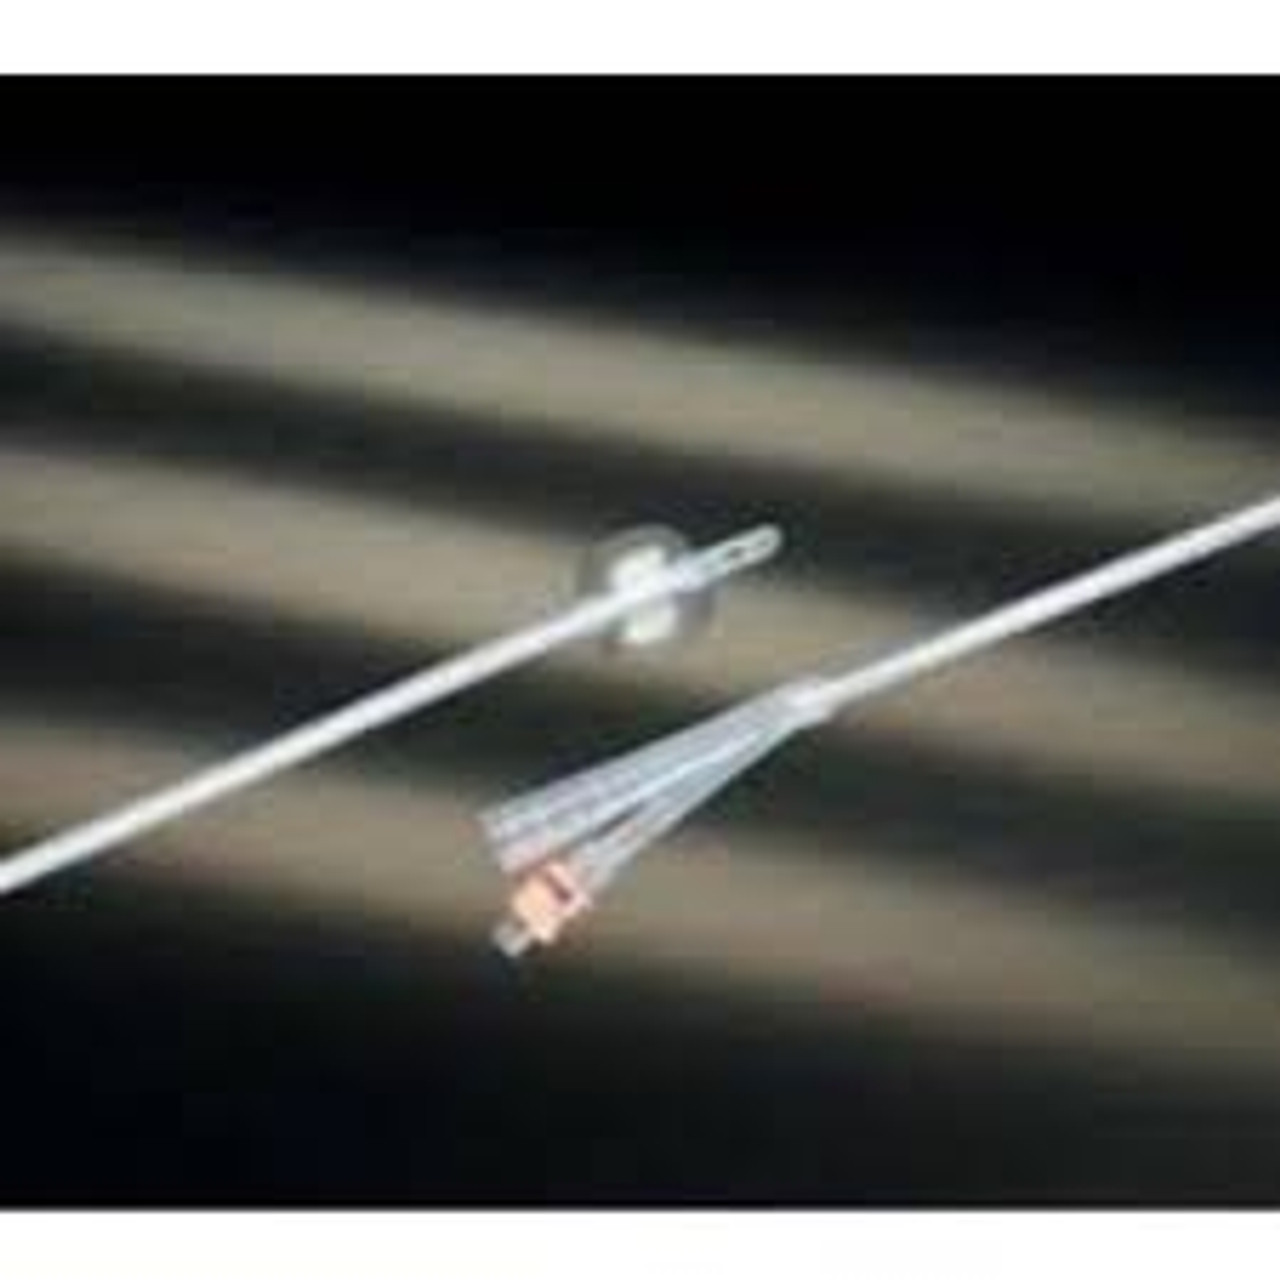 BARD 0170SI16 LUBRI-SIL 100% SILICONE INFECTION CONTROL 2-WAY SPECIALTY FOLEY CATHETER, 16FR 5CC, COUDE (Bard 0170SI16)